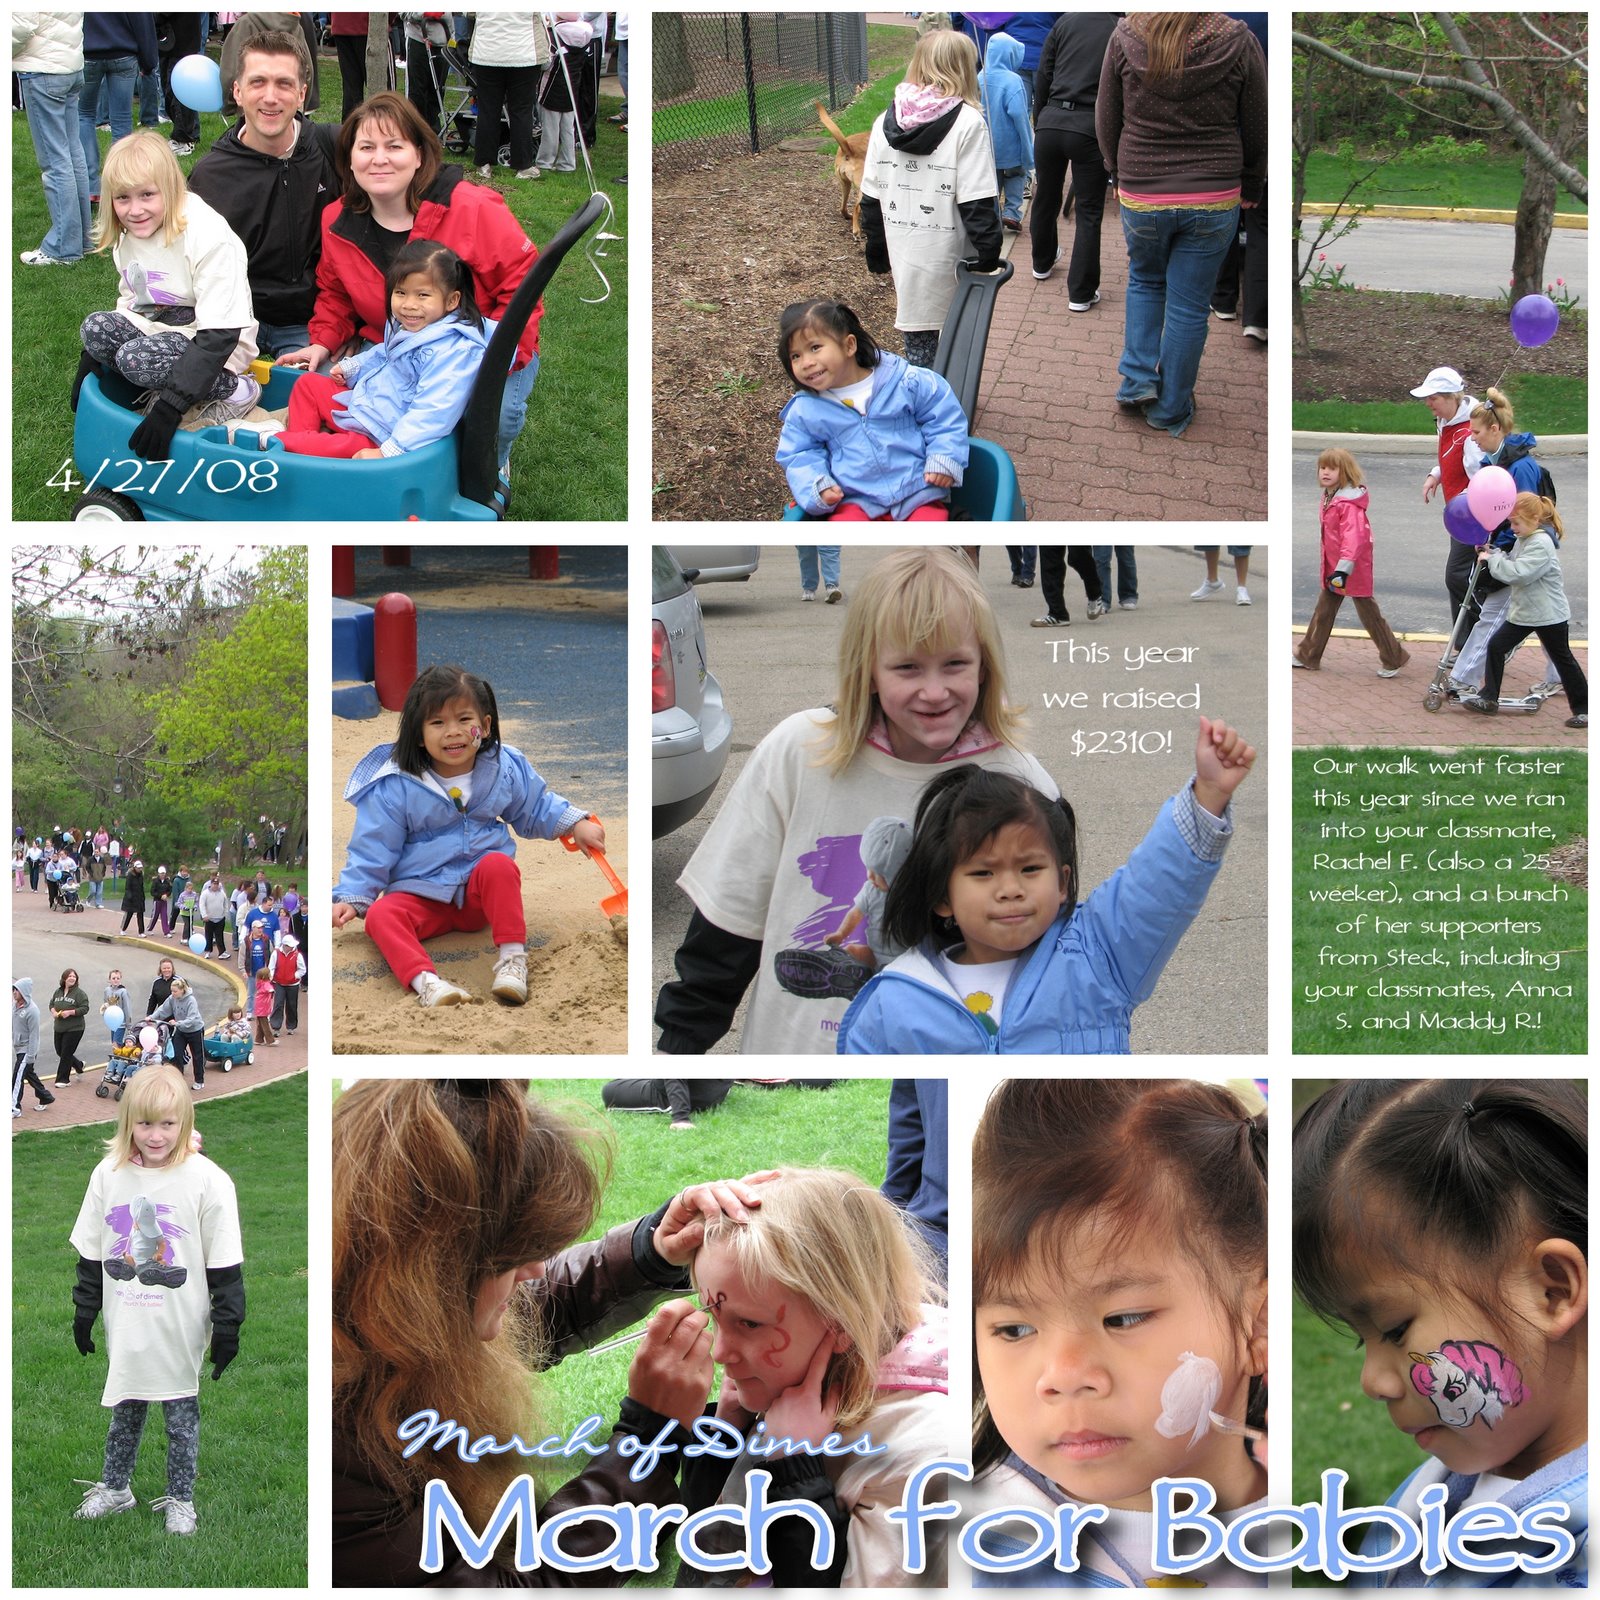 [2008.04.27+March+of+Dimes_March+for+Babies.JPG]